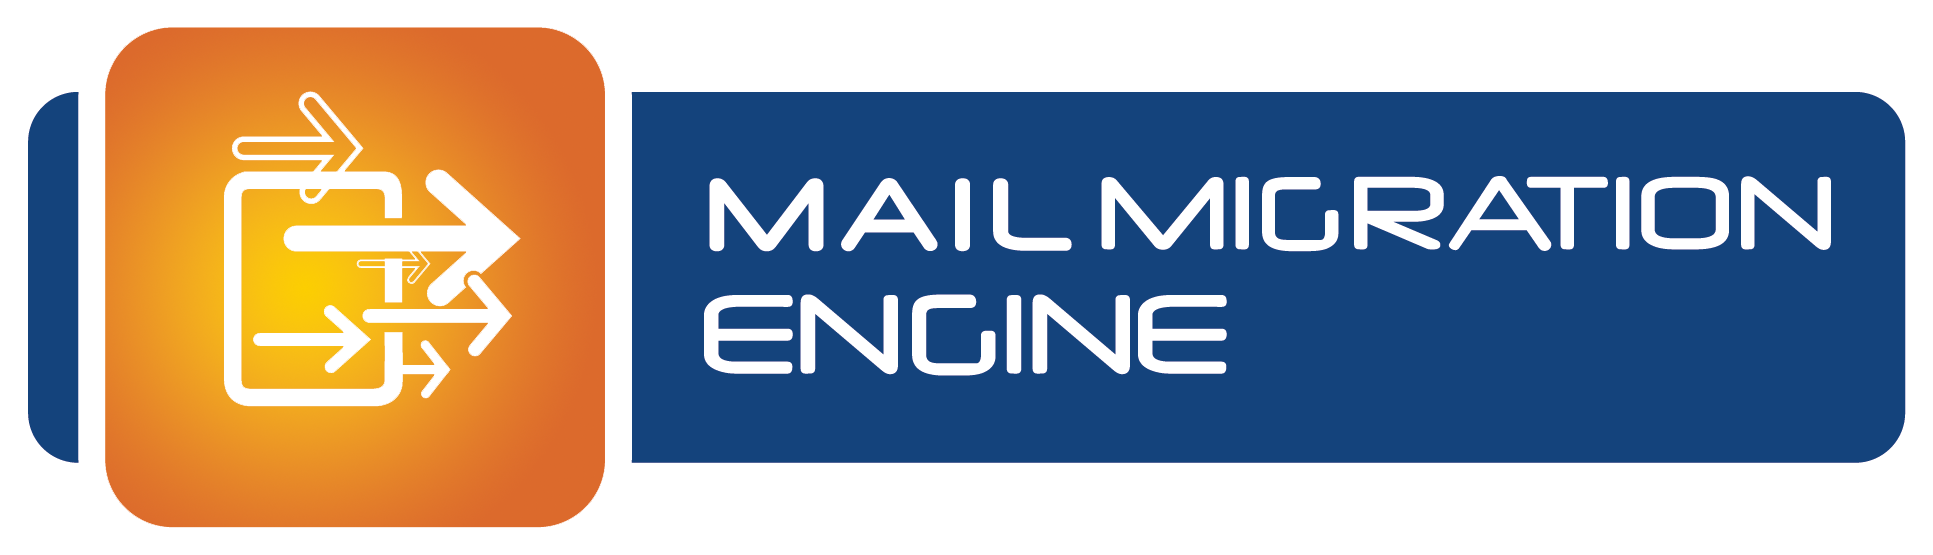 BCC MigrationEngine for Mail product logo